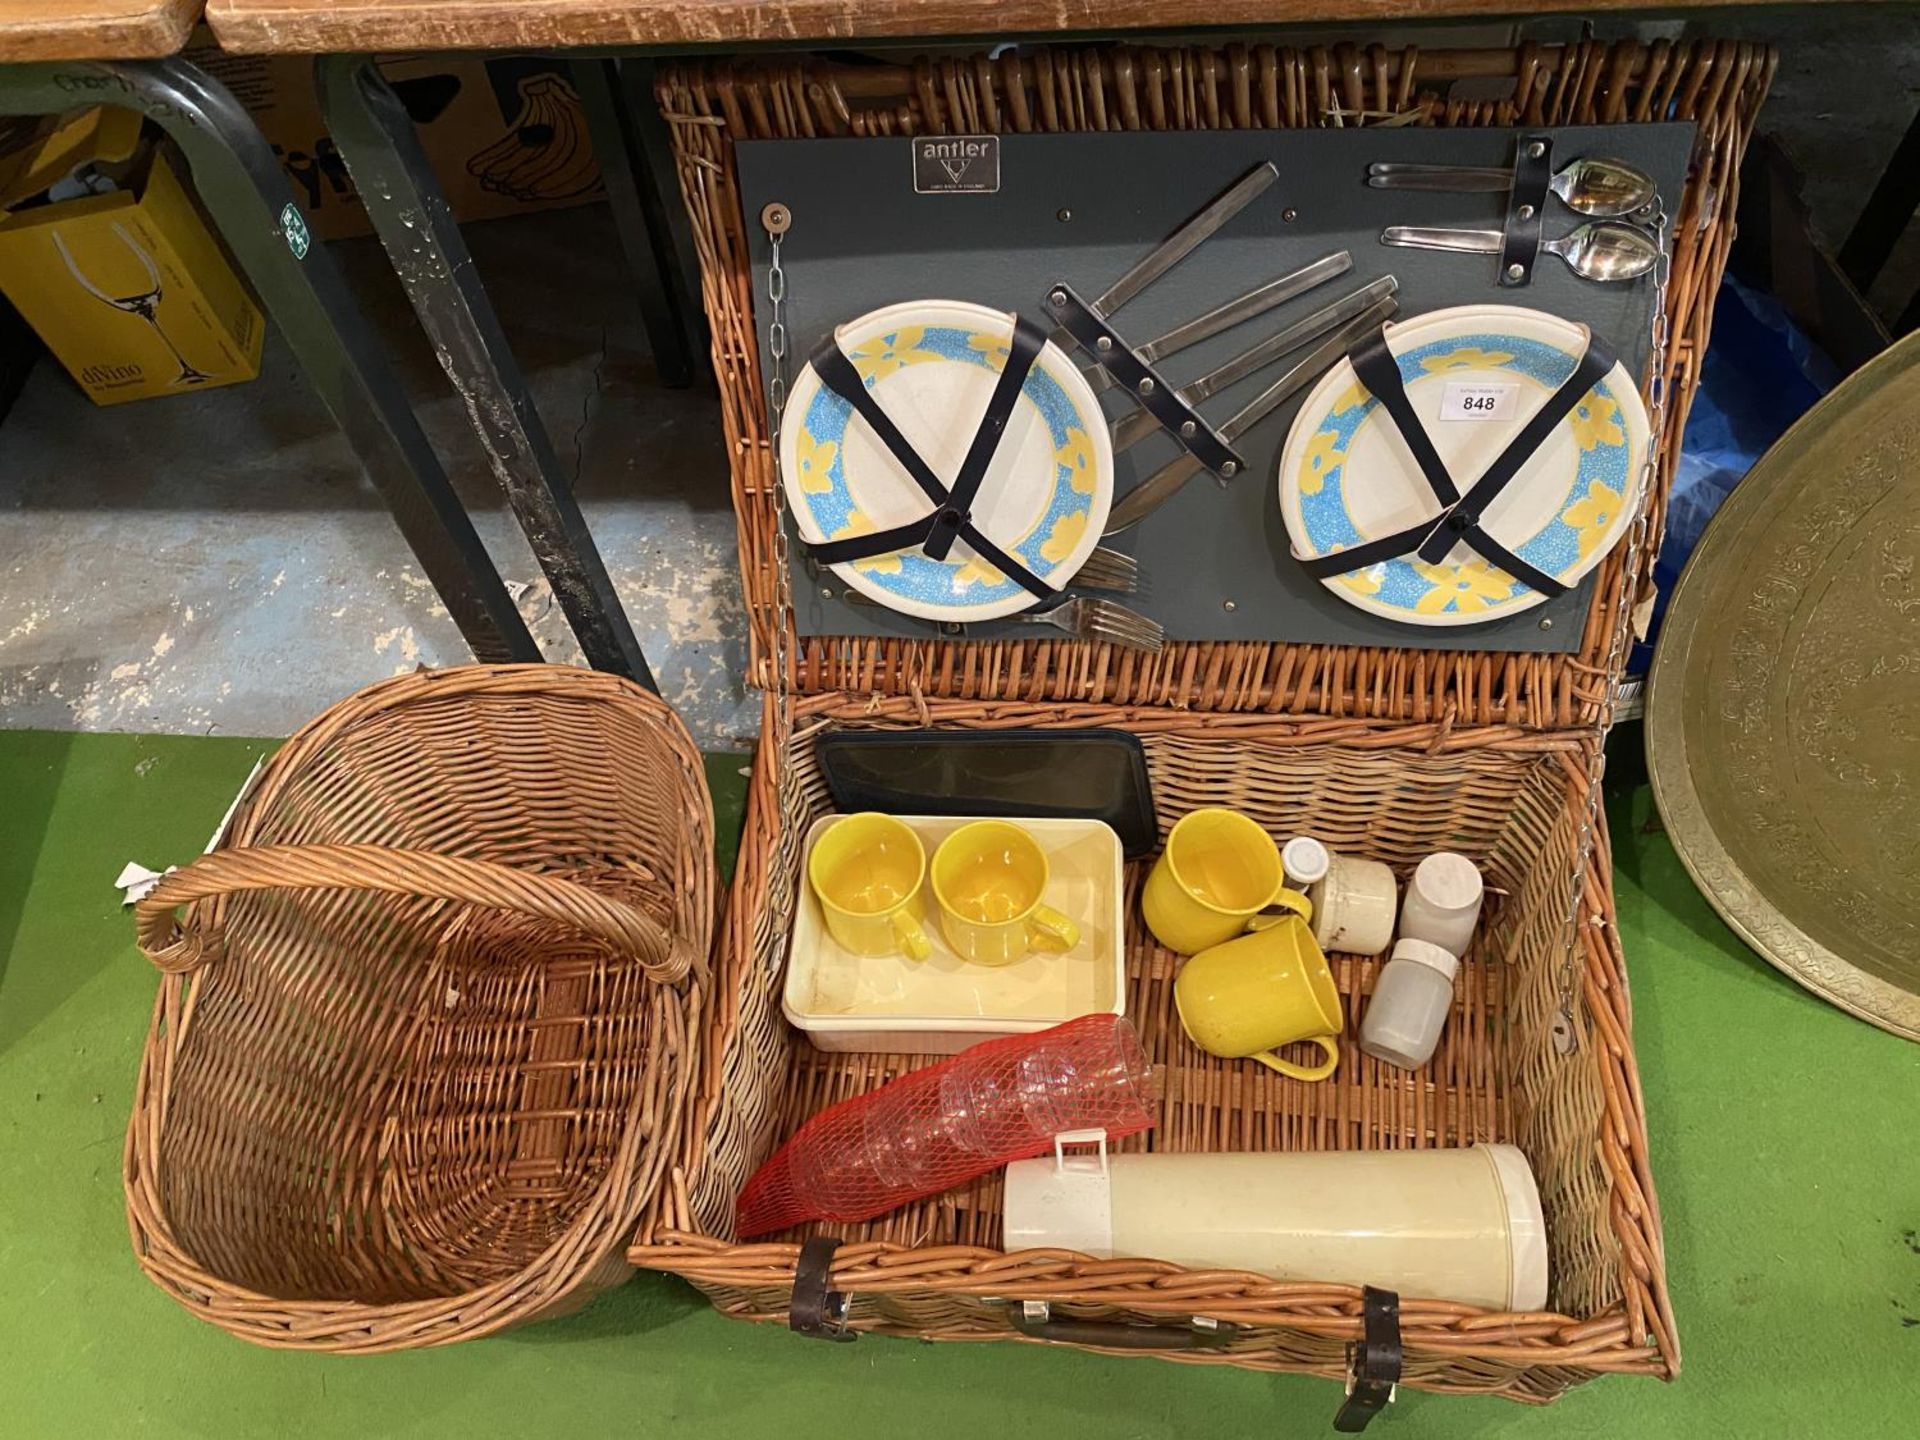 AN ANTLER PICNIC HAMPER TO INCLUDE A FOUR PERSON SET OF PLATES, CUTLERY, MUGS AND DRINKING GLASSES